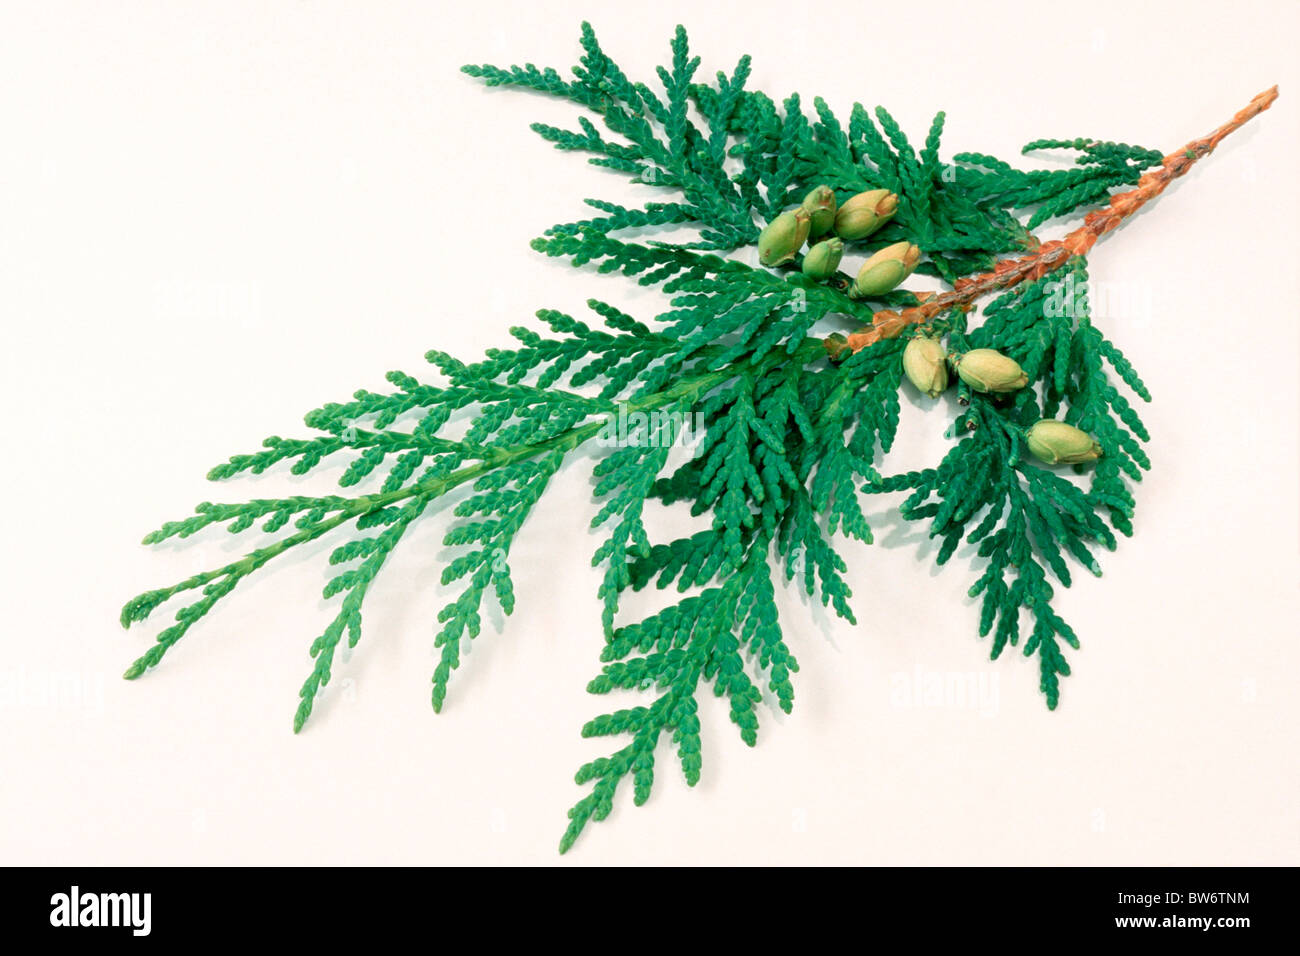 Eastern Arborvitae (Thuja occidentalis), twig with cones, studio picture against a white background Stock Photo